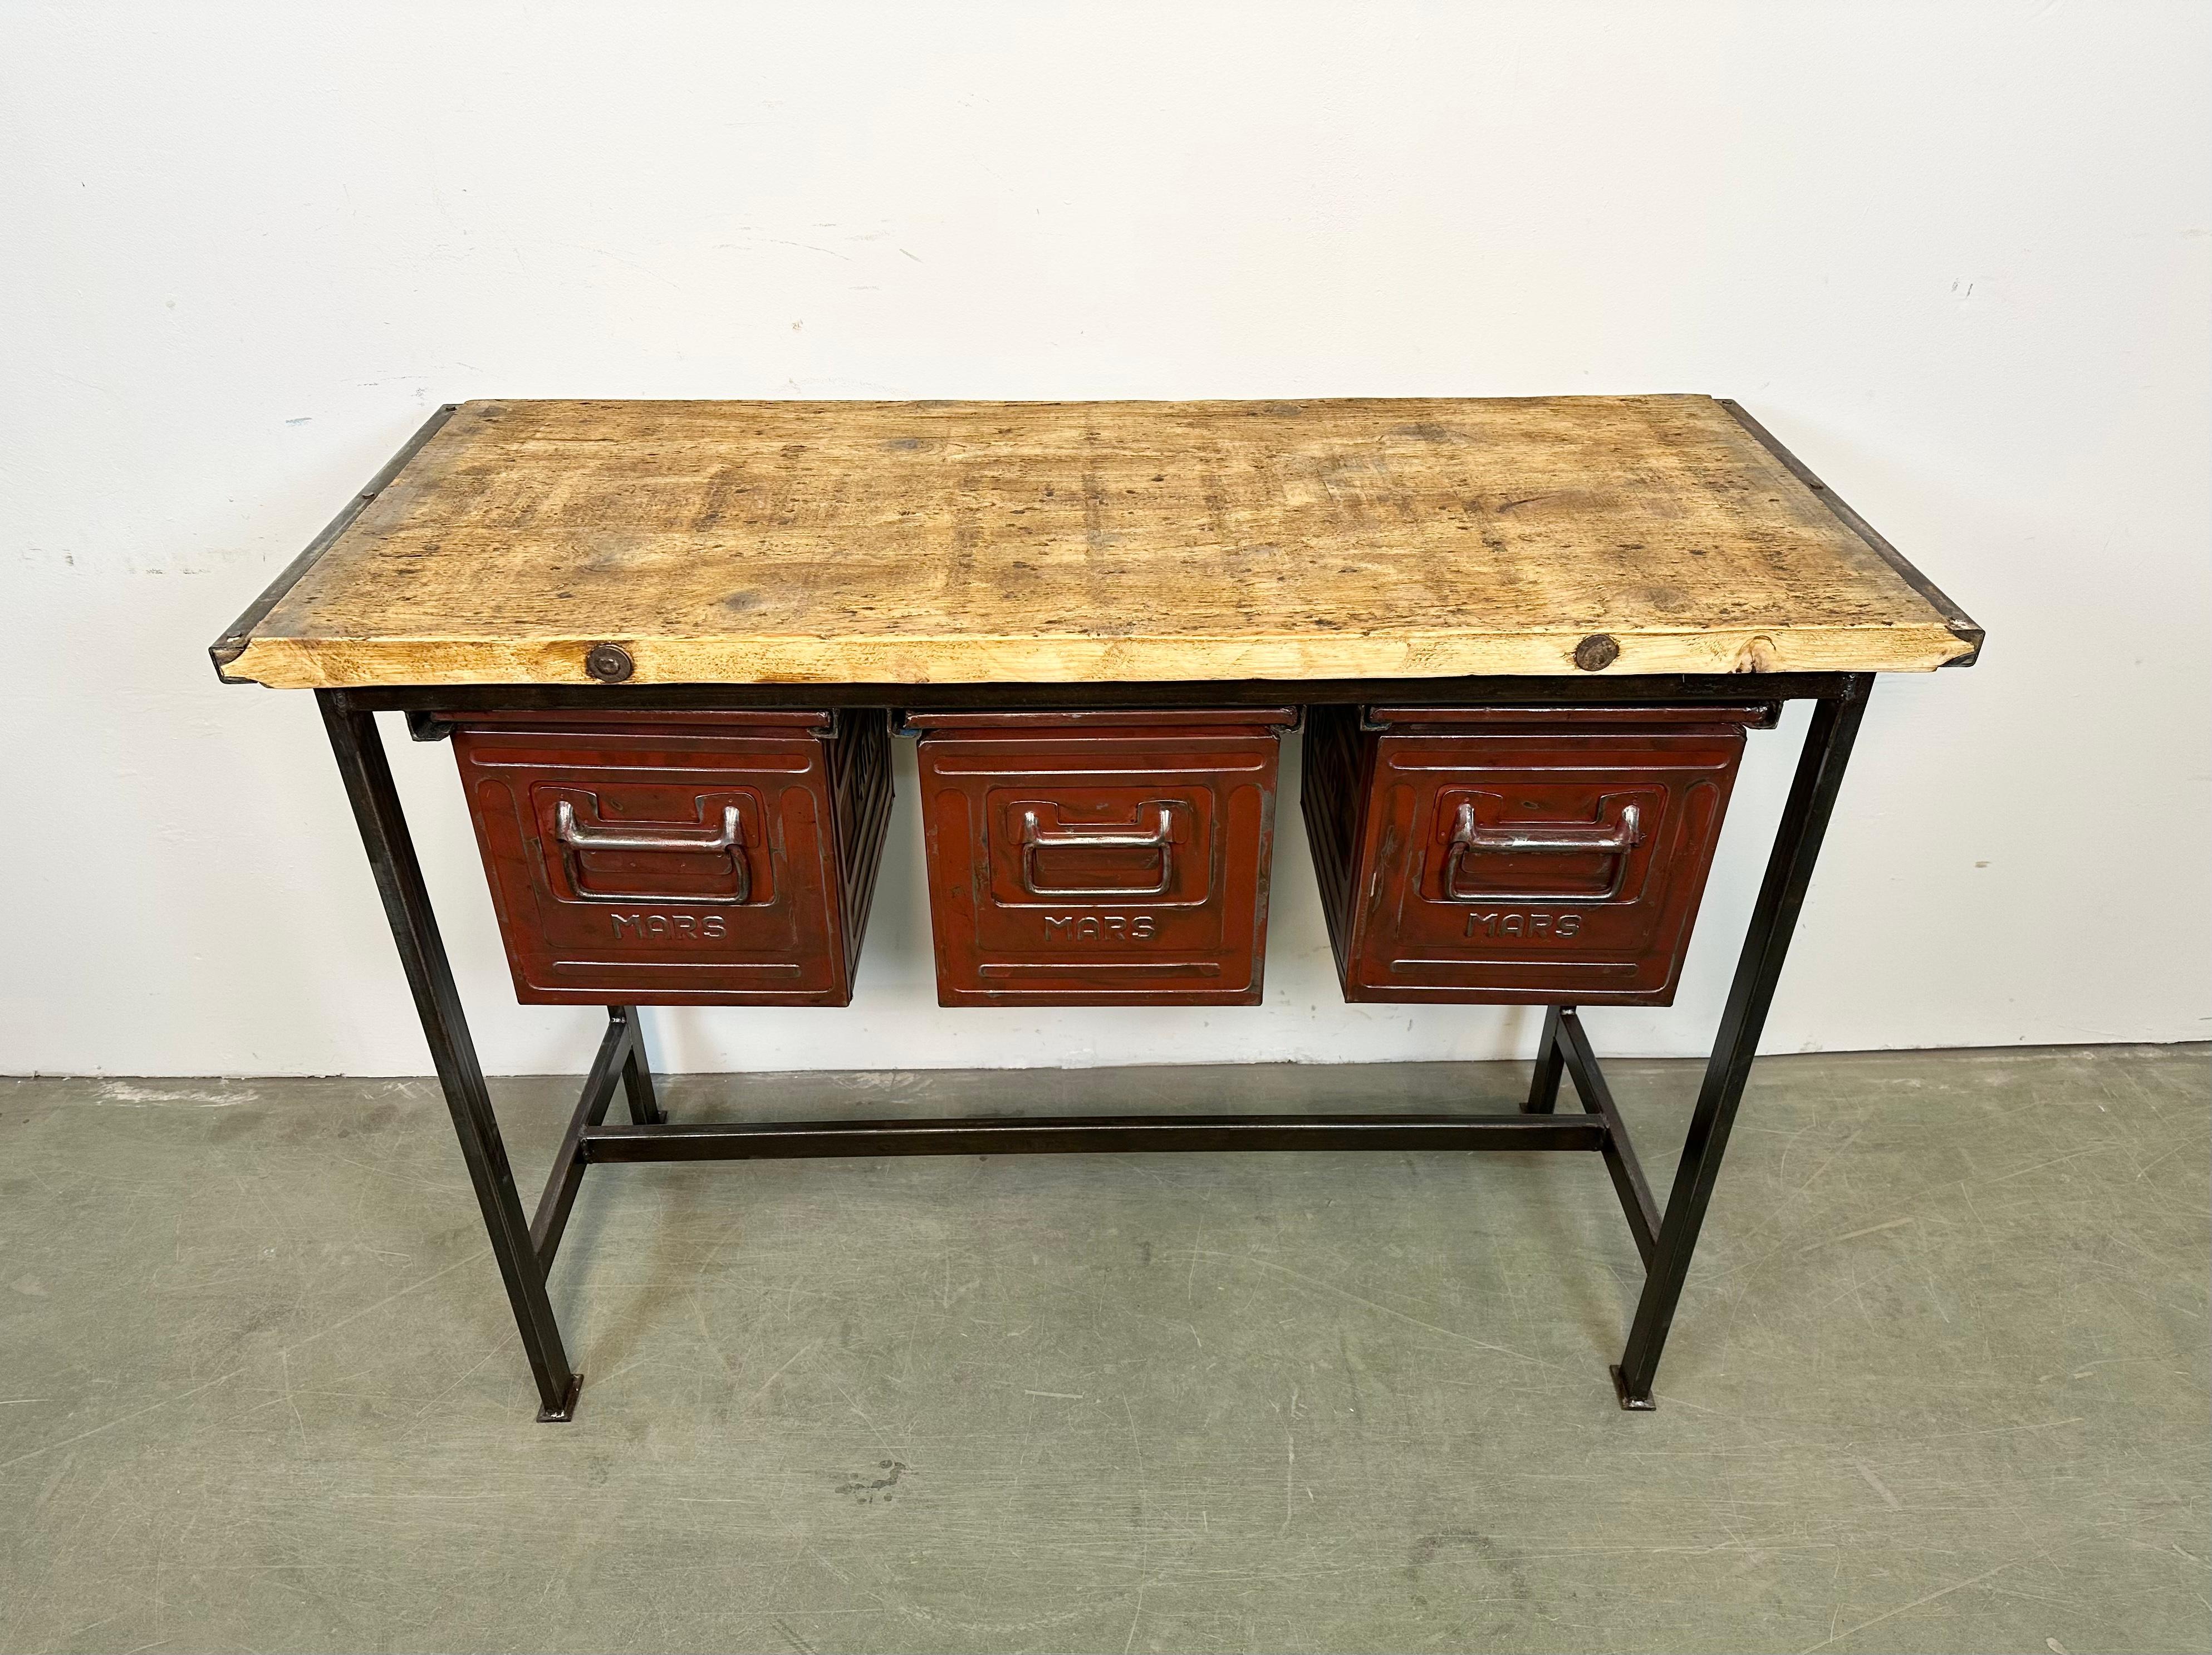 Czech Industrial Worktable with Three Iron Drawers, 1960s For Sale